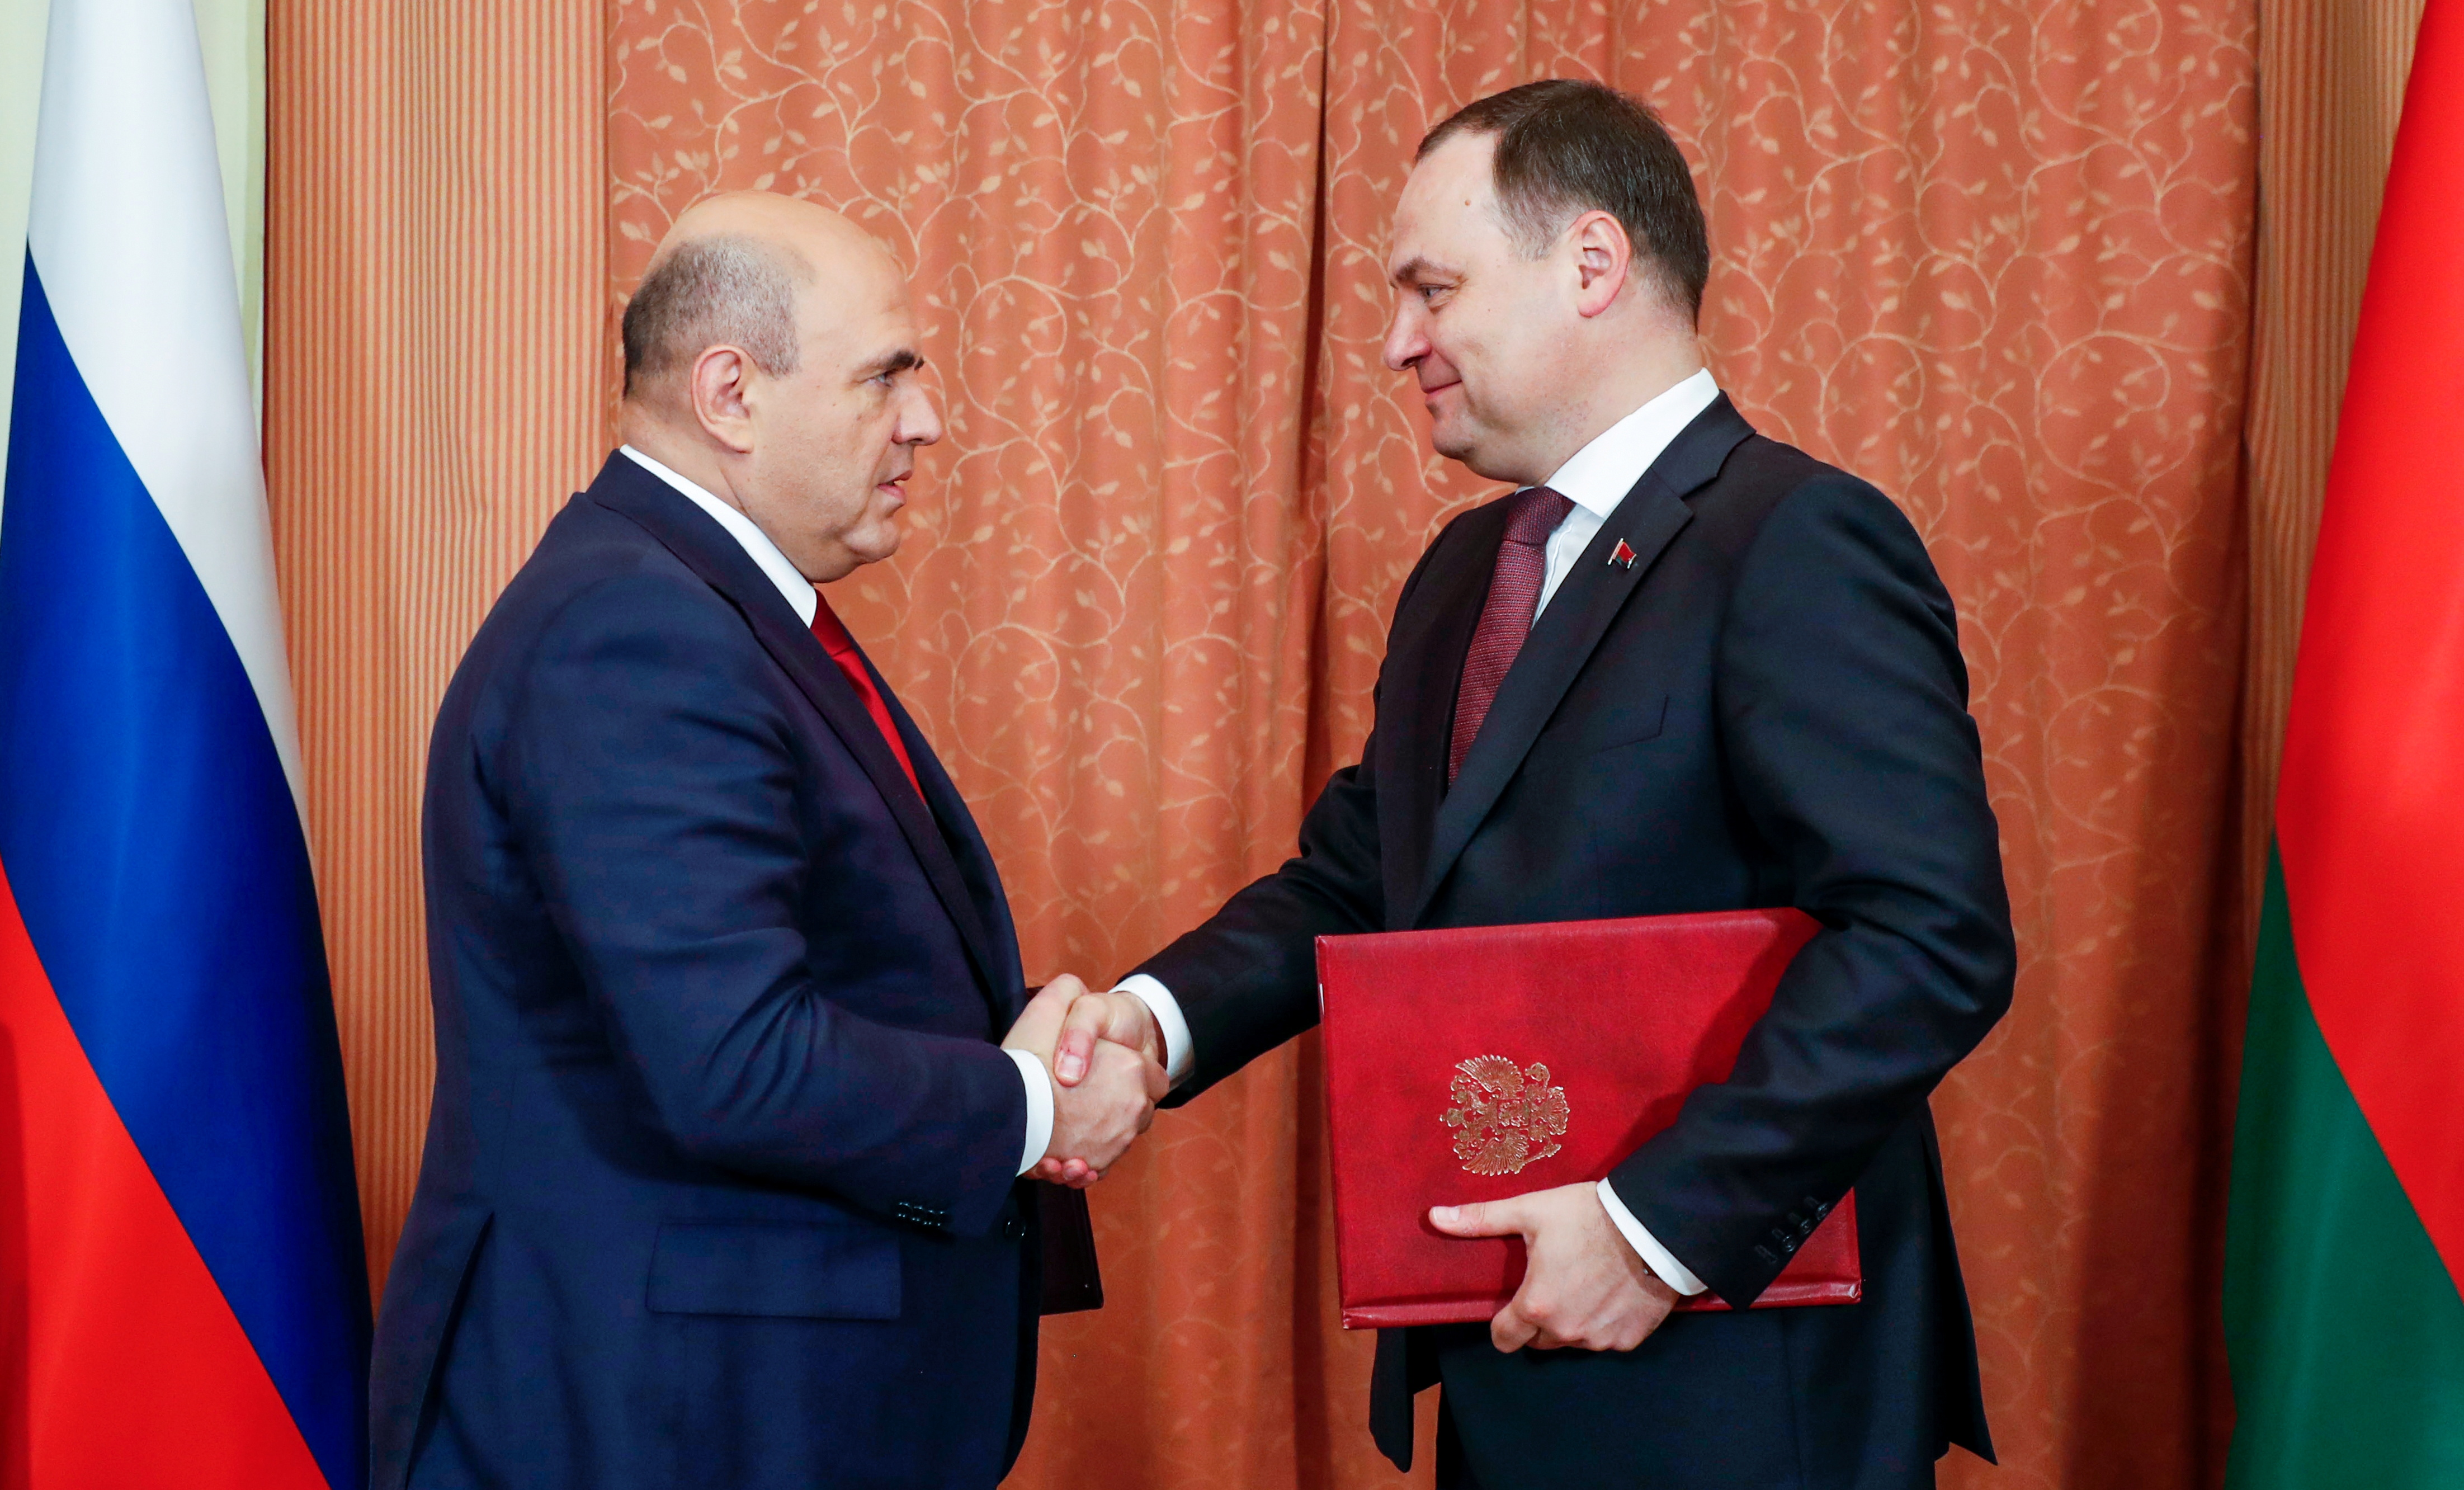 Russian Prime Minister Mishustin and his Belarusian counterpart Roman Golovchenko attend a signing ceremony in Minsk